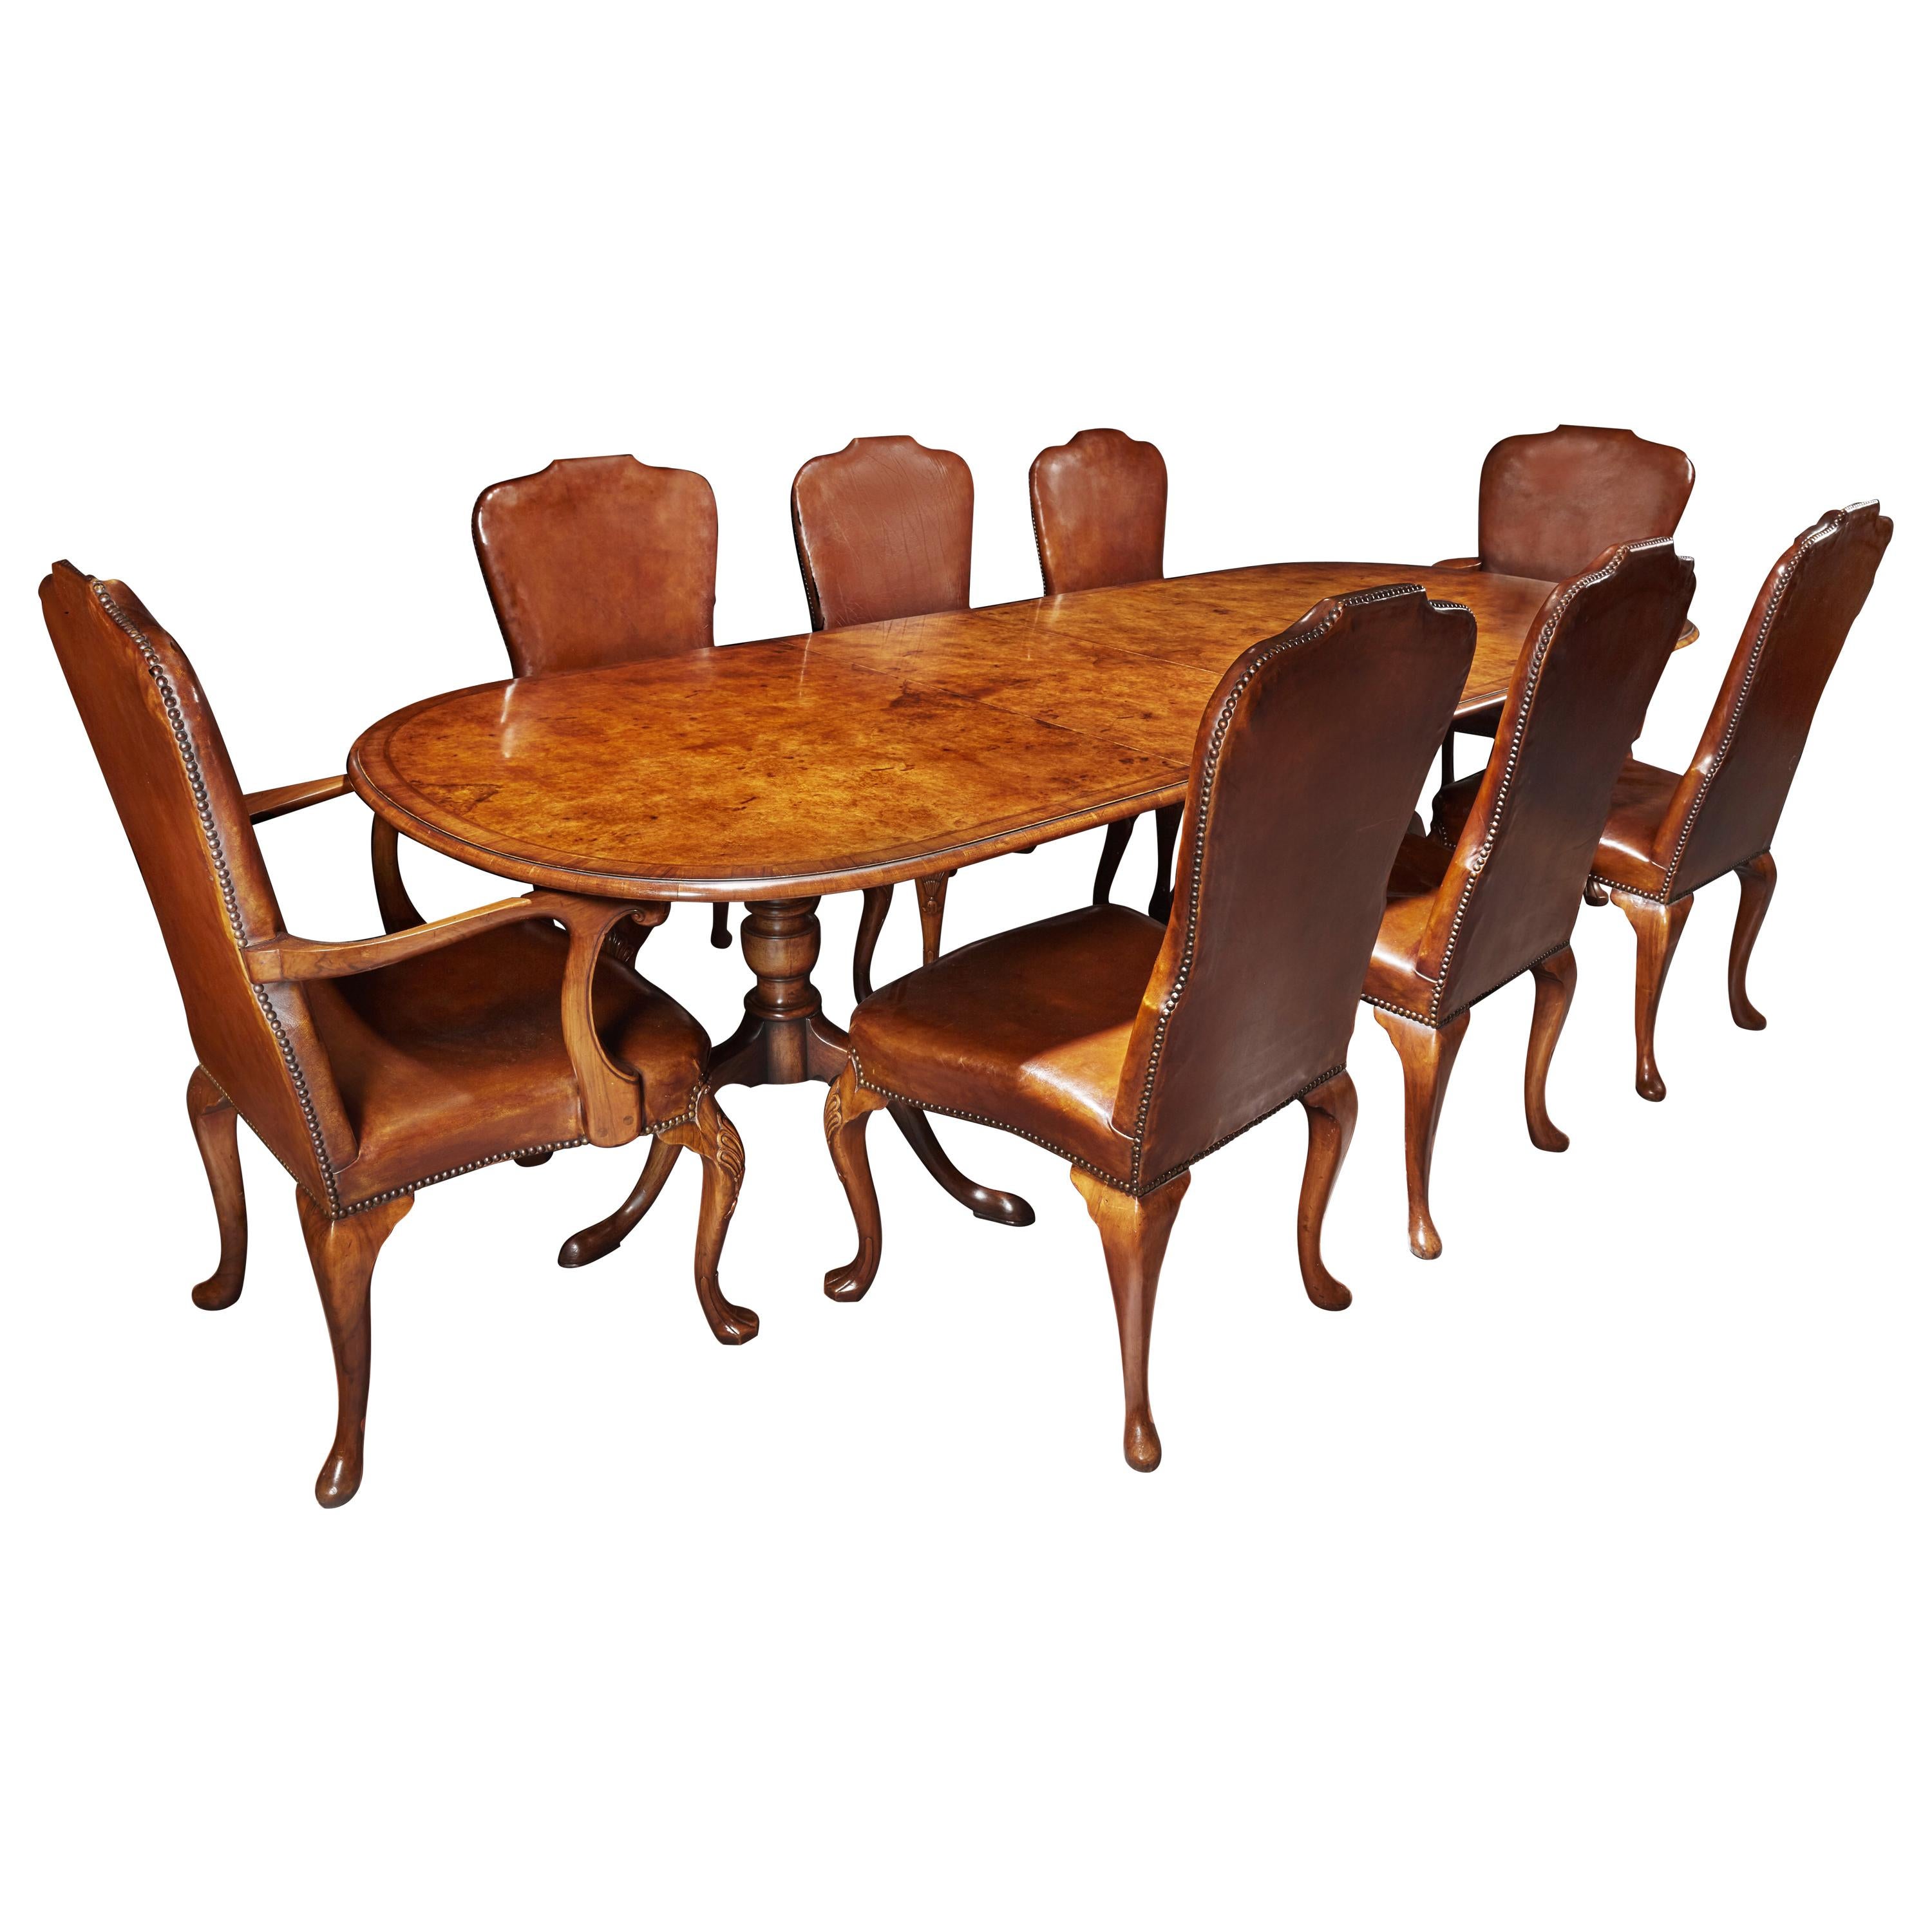 Antique Early 20th Century Walnut Dining Table Set with 8 Leather Chairs